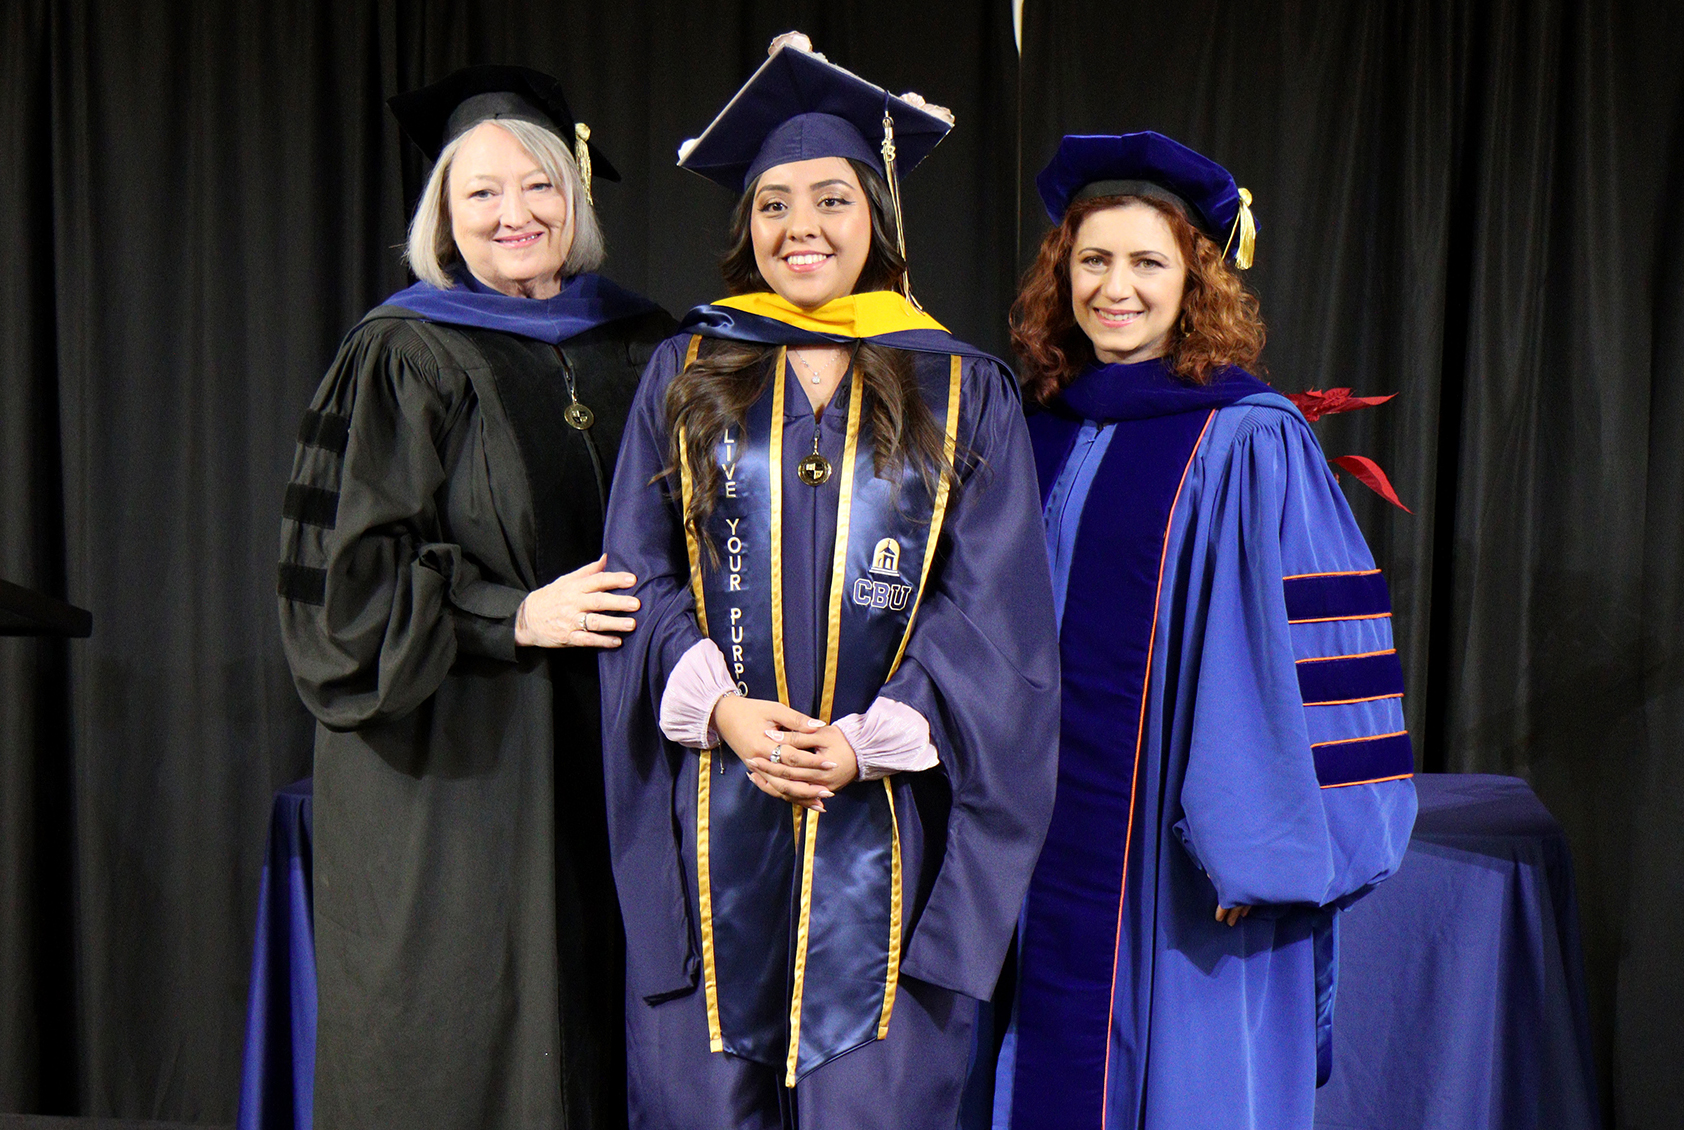 Hundreds of graduate degree candidates at California Baptist University celebrated their academic achievements with hooding ceremonies leading up to commencement on Dec. 13.